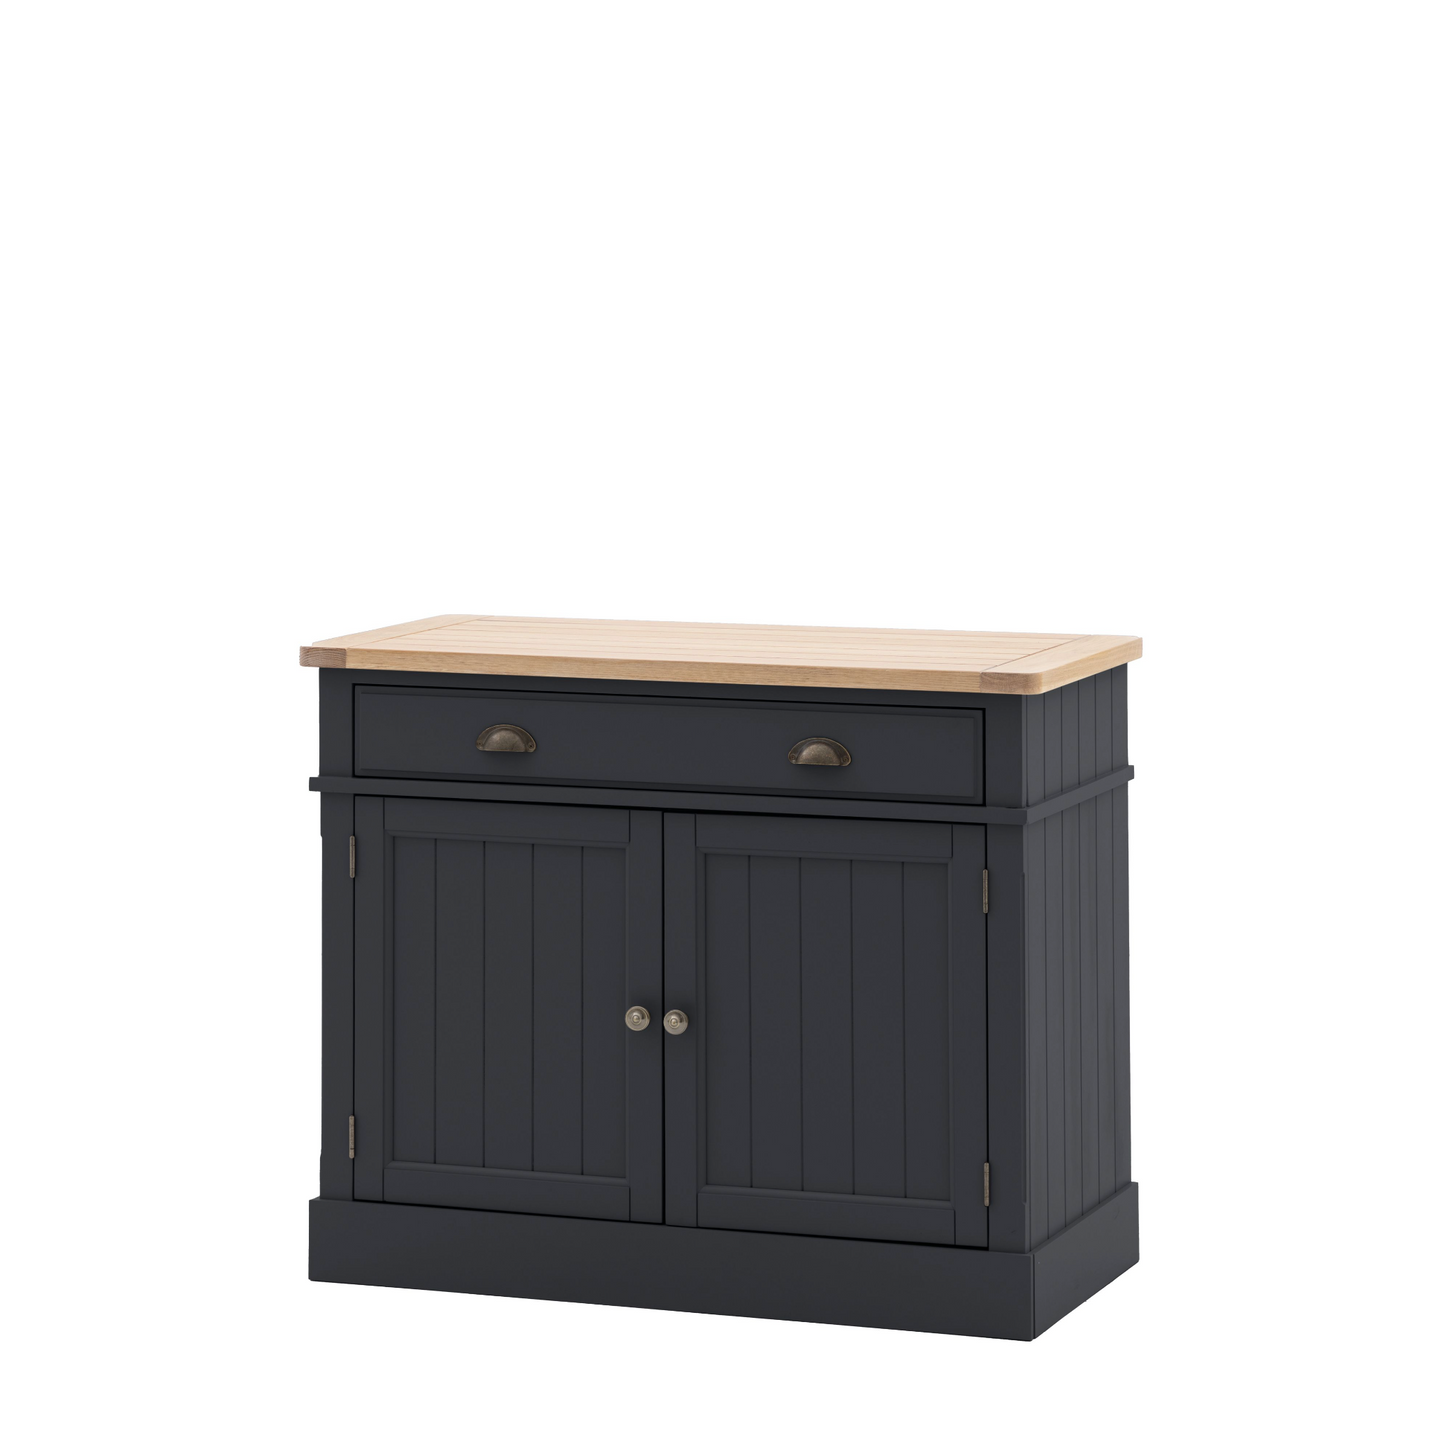 A Buckland 2 Door 1 Drawer Sideboard with a wooden top, perfect for interior decor and home furniture.